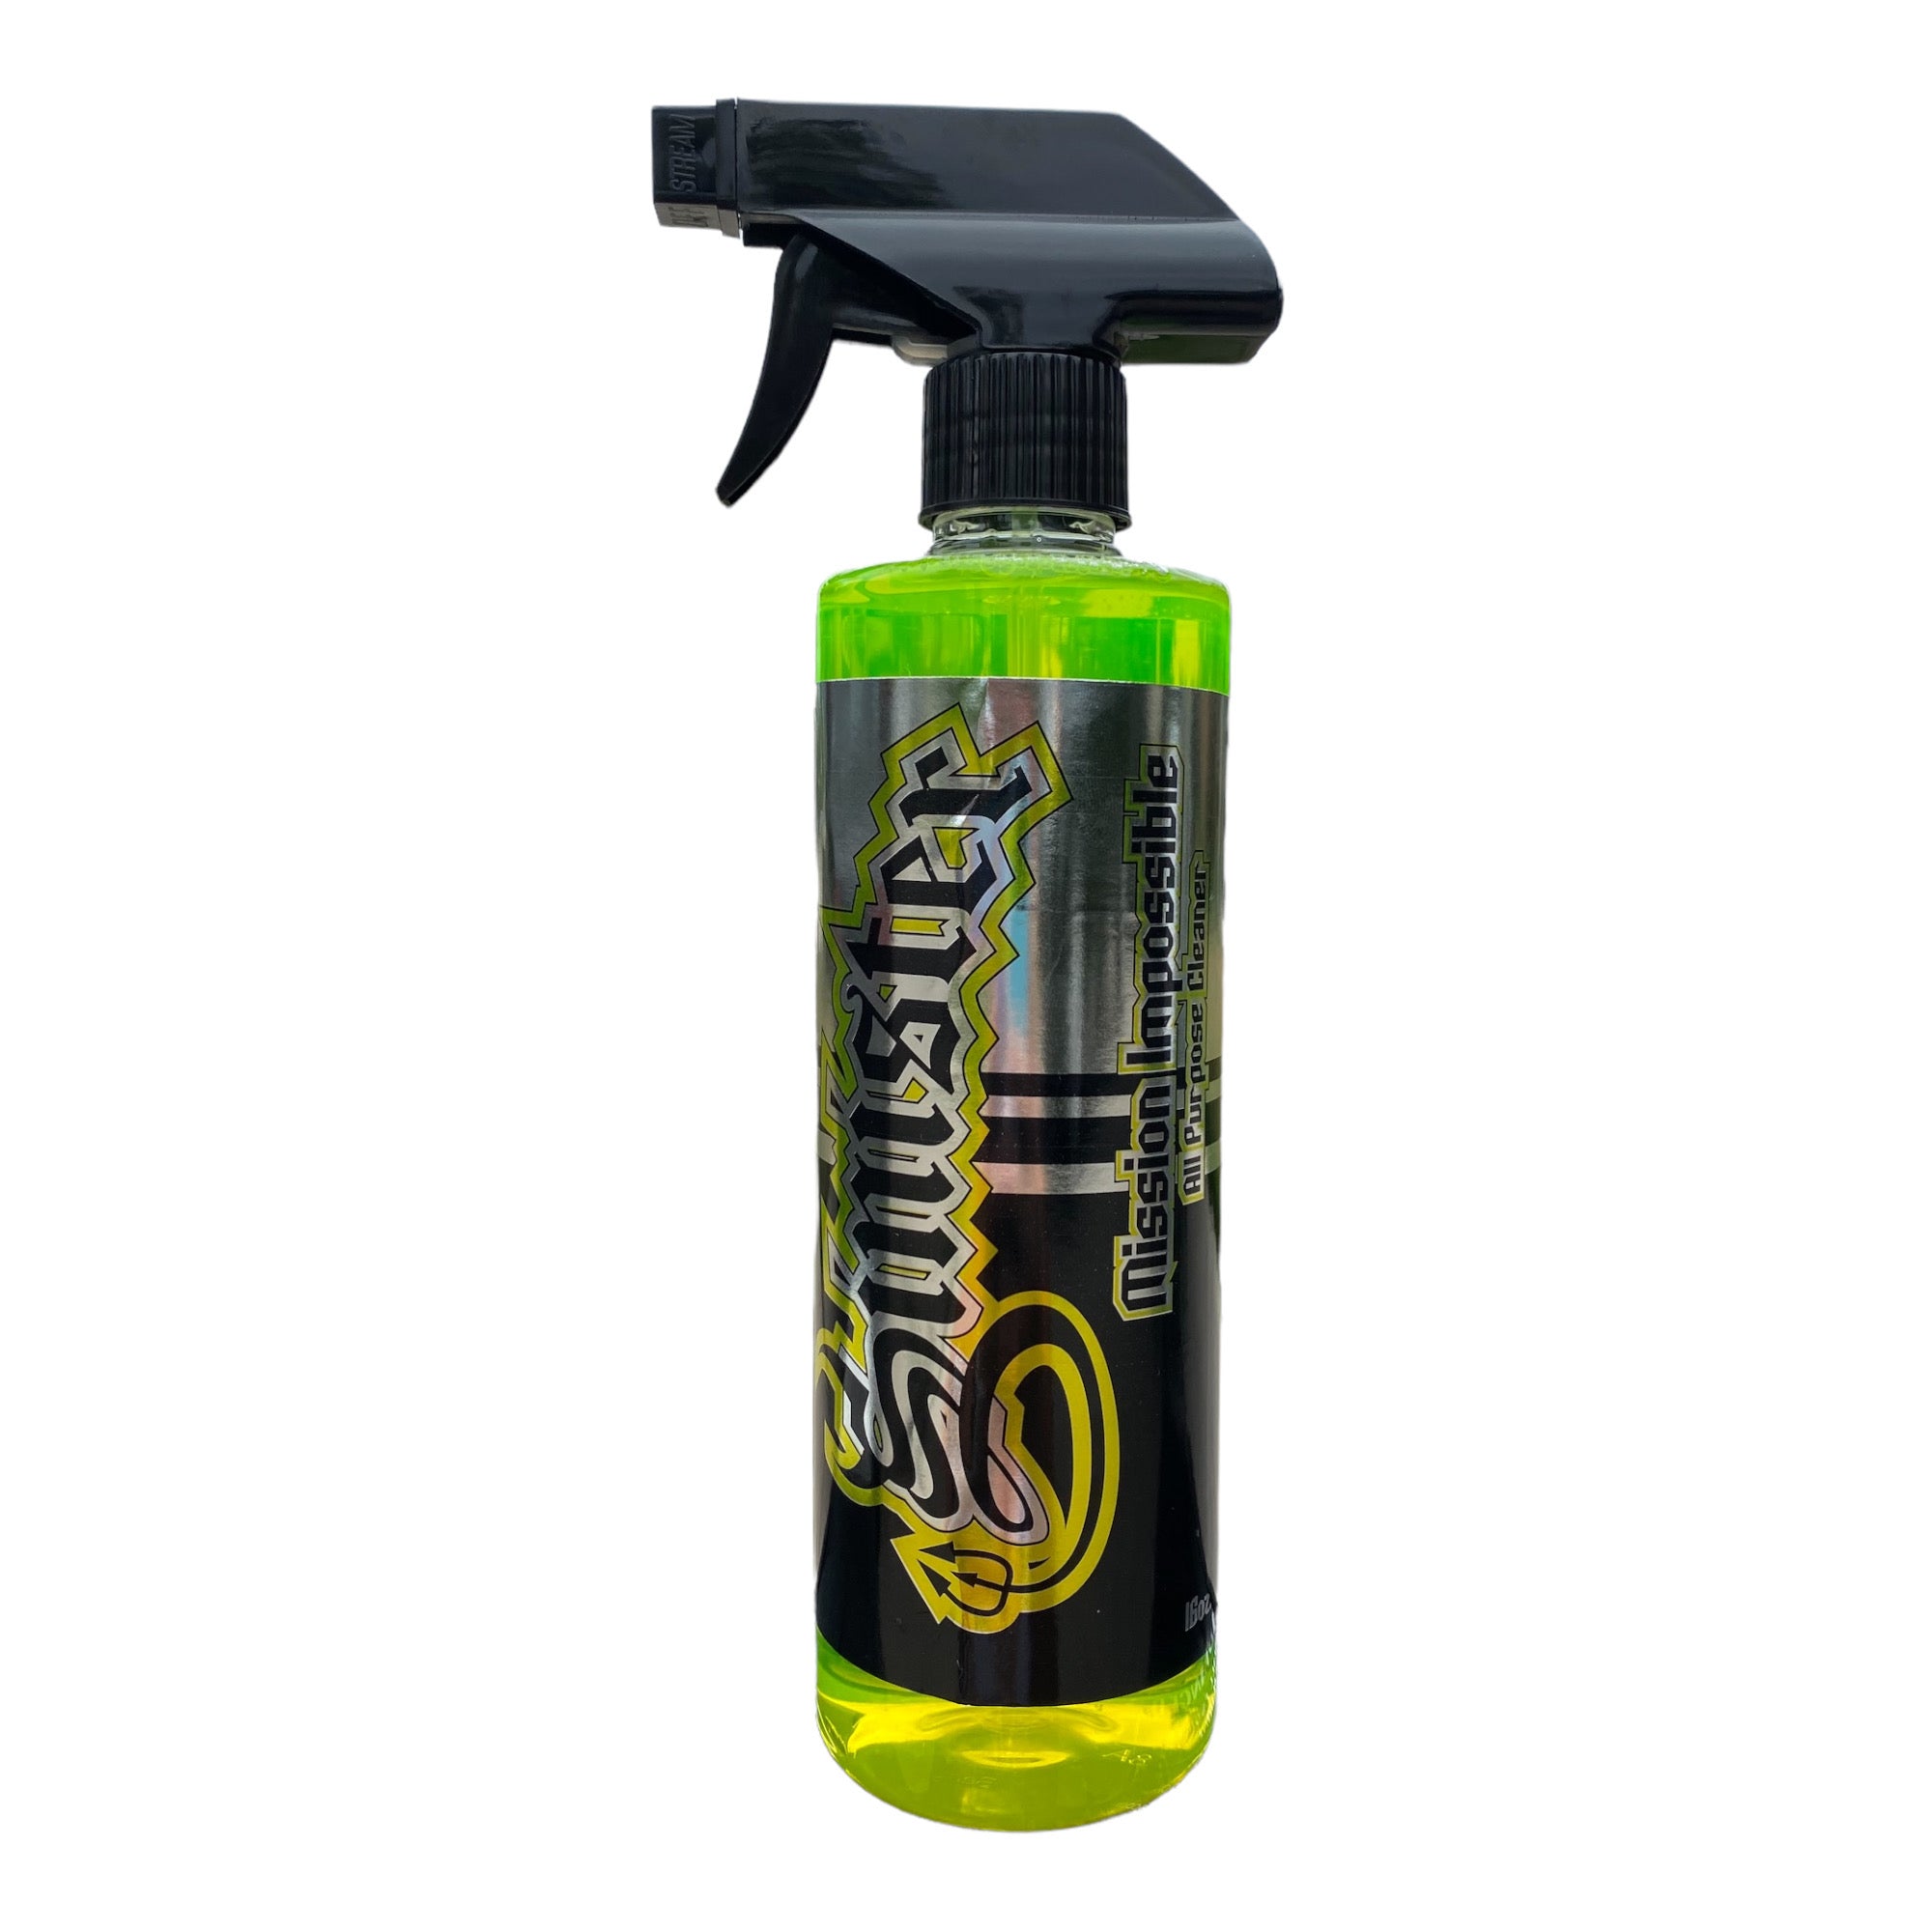 Sinister Xtreme Touchless Truck Wash Soap 1 GAL JUG